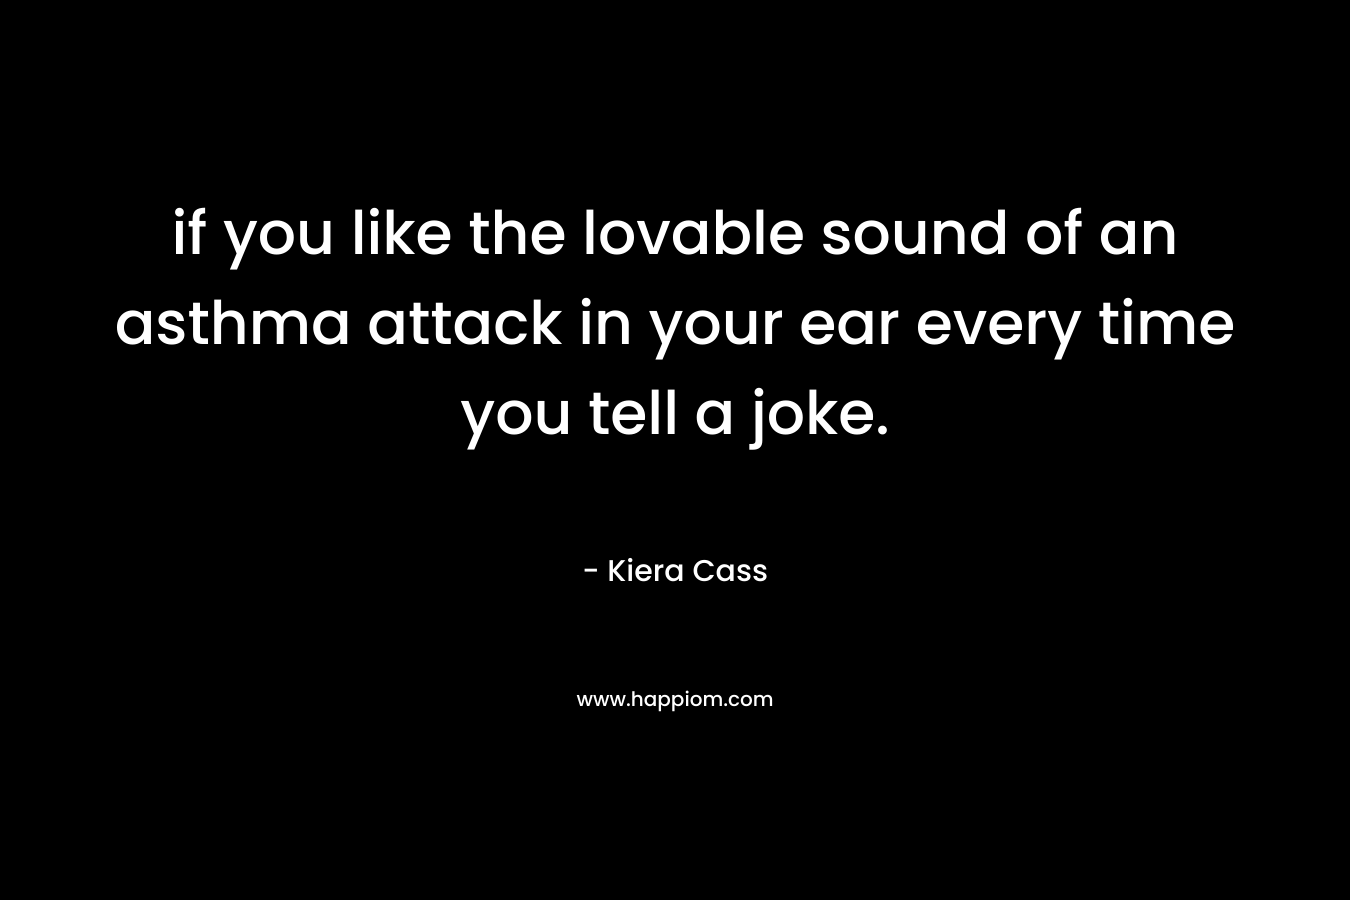 if you like the lovable sound of an asthma attack in your ear every time you tell a joke. – Kiera Cass